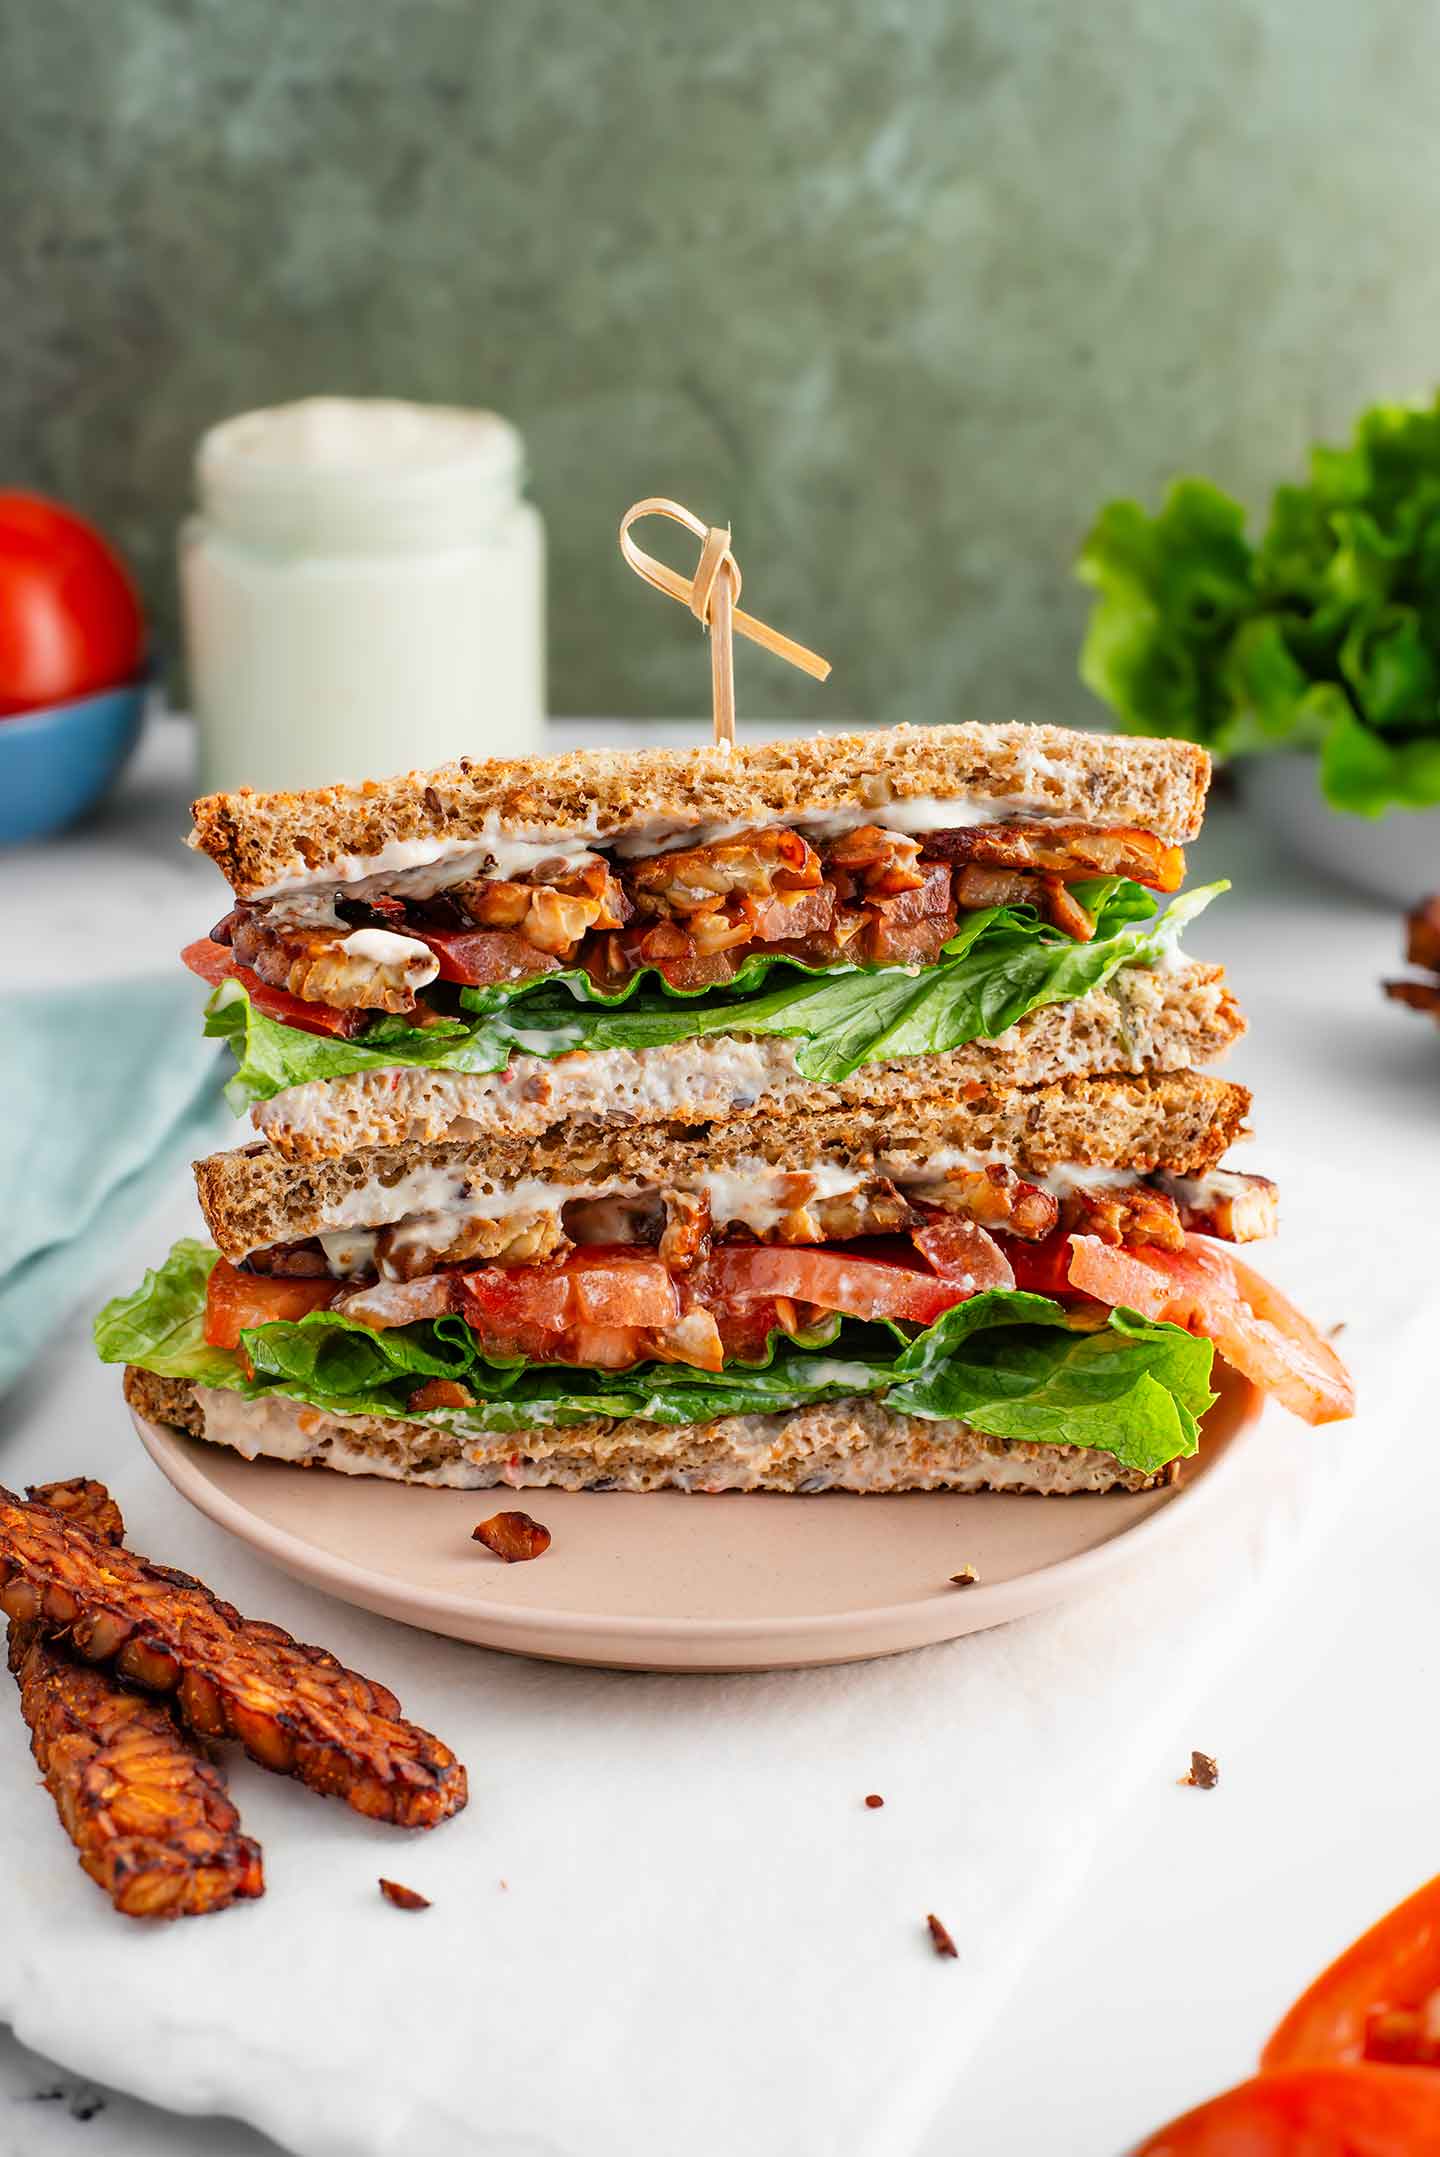 Two halves of a vegan BLT sandwich are stacked. Crispy tempeh bacon, lettuce, tomato, and oil-free mayonnaise are sandwiched between slices of seeded bread.